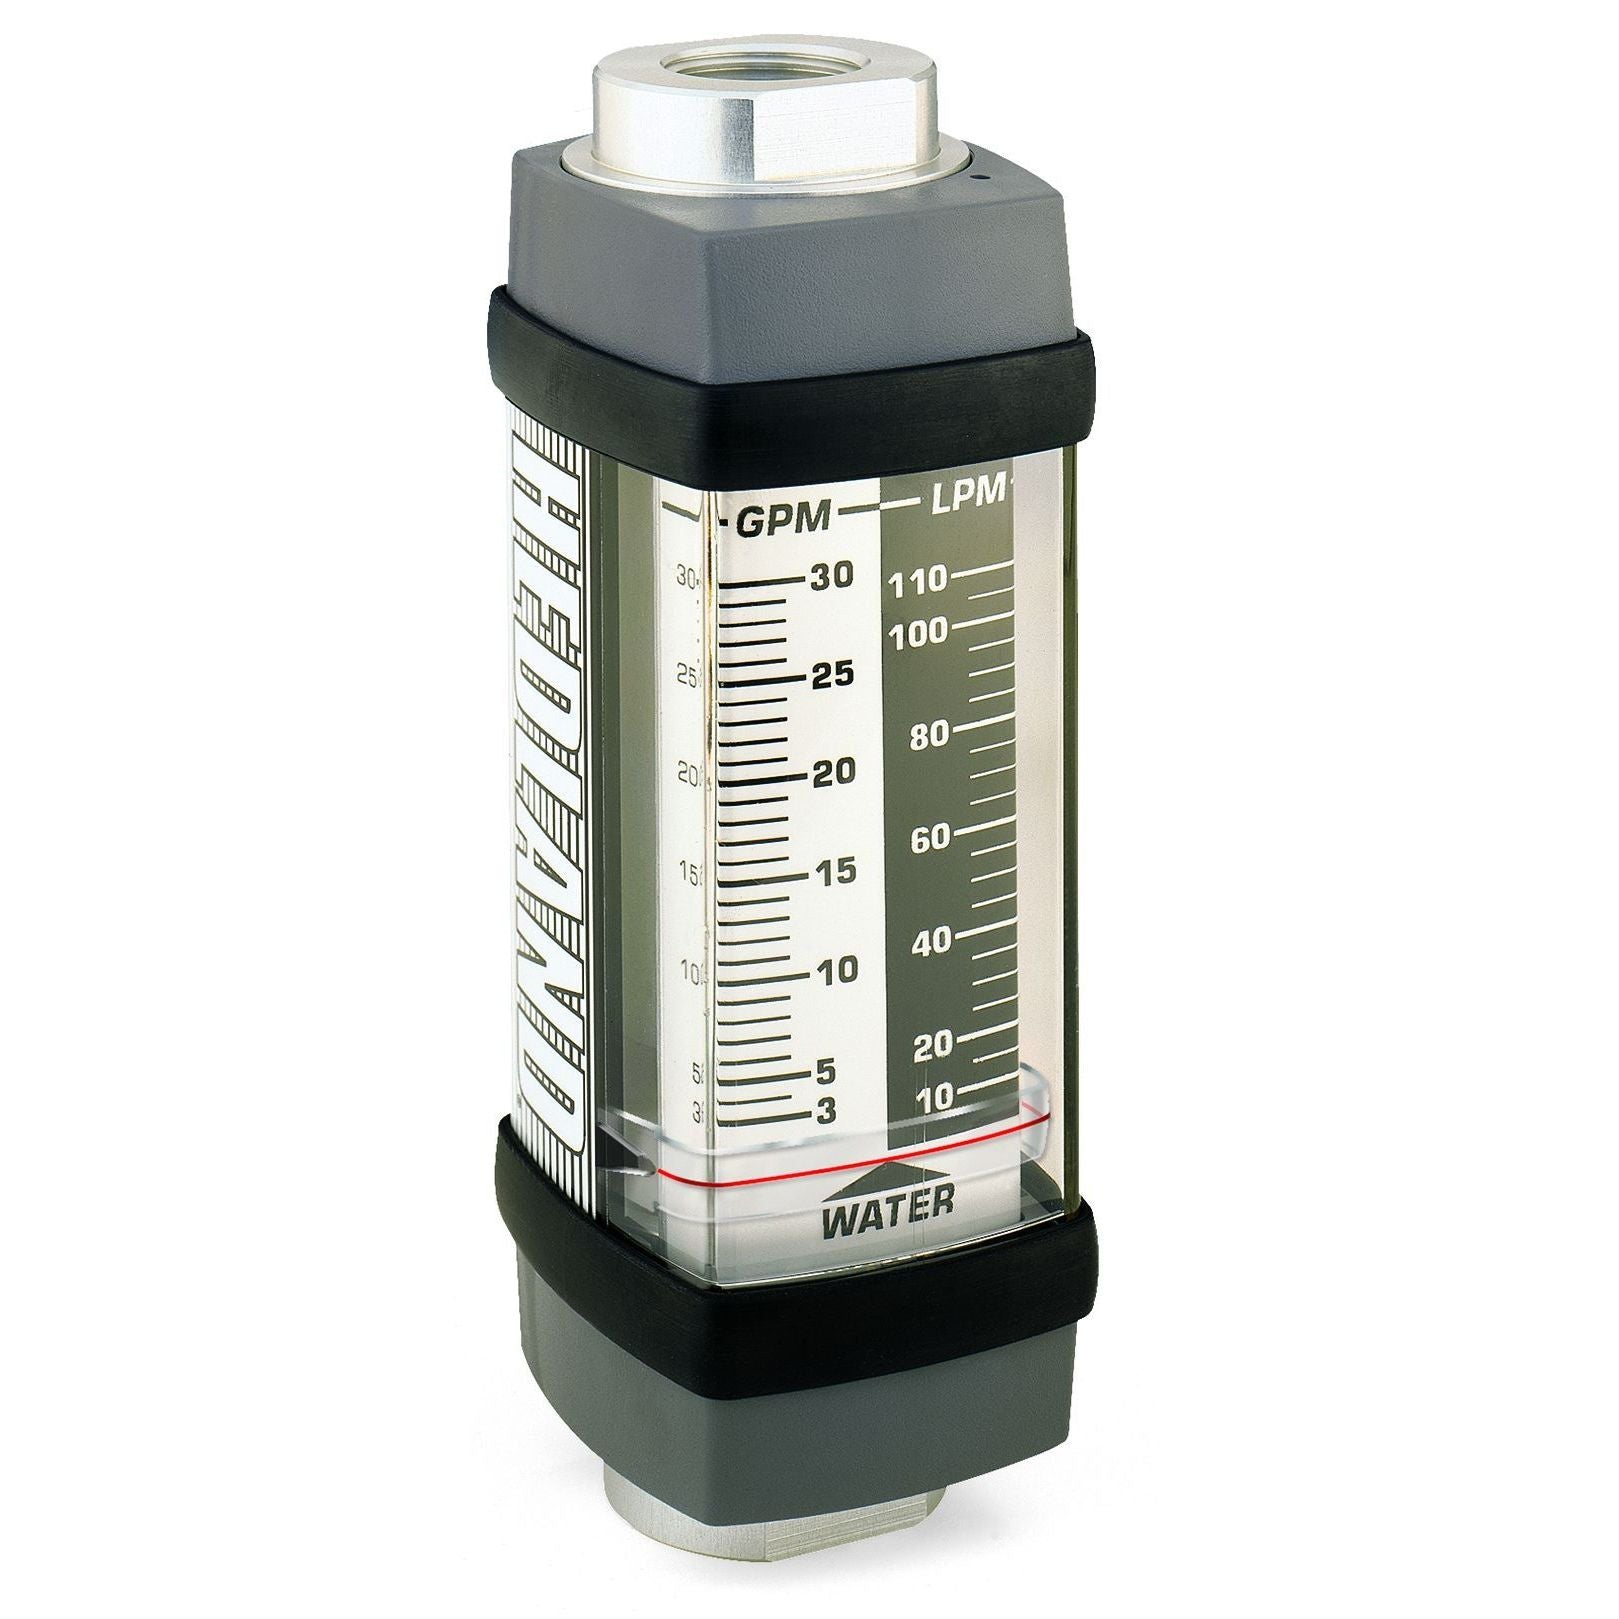 H744X-040 : Hedland 5000psi 316SS Flow Meter for Caustic or Corrosive Liquids, 1 NPT, 4 to 40 GPM